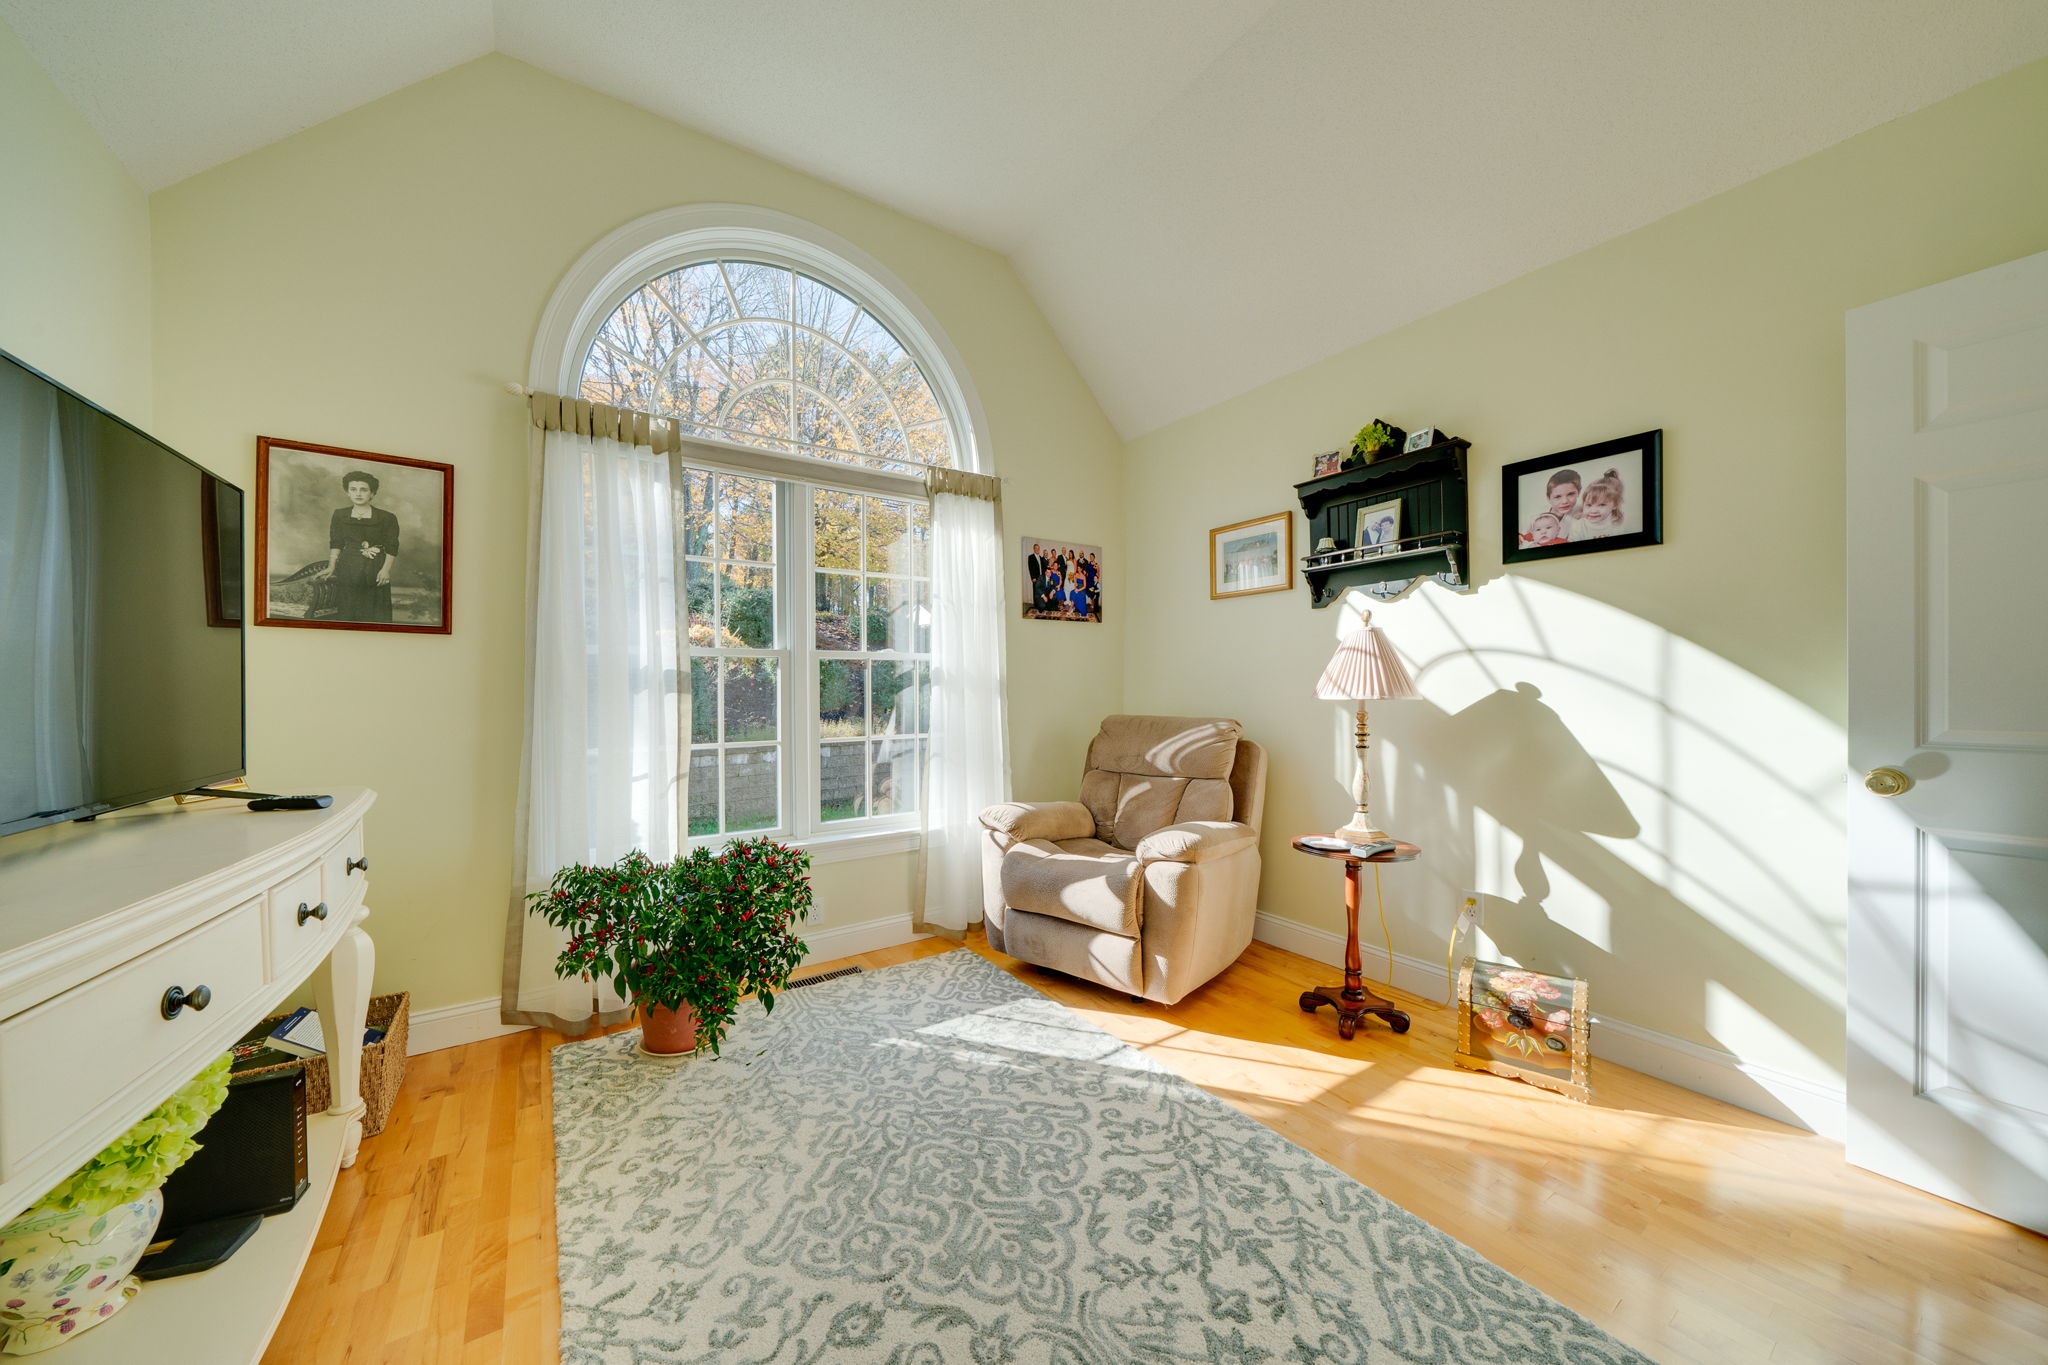 This second Bedroom is at the Front of the House with Vaulted Ceilings and Palladian Window